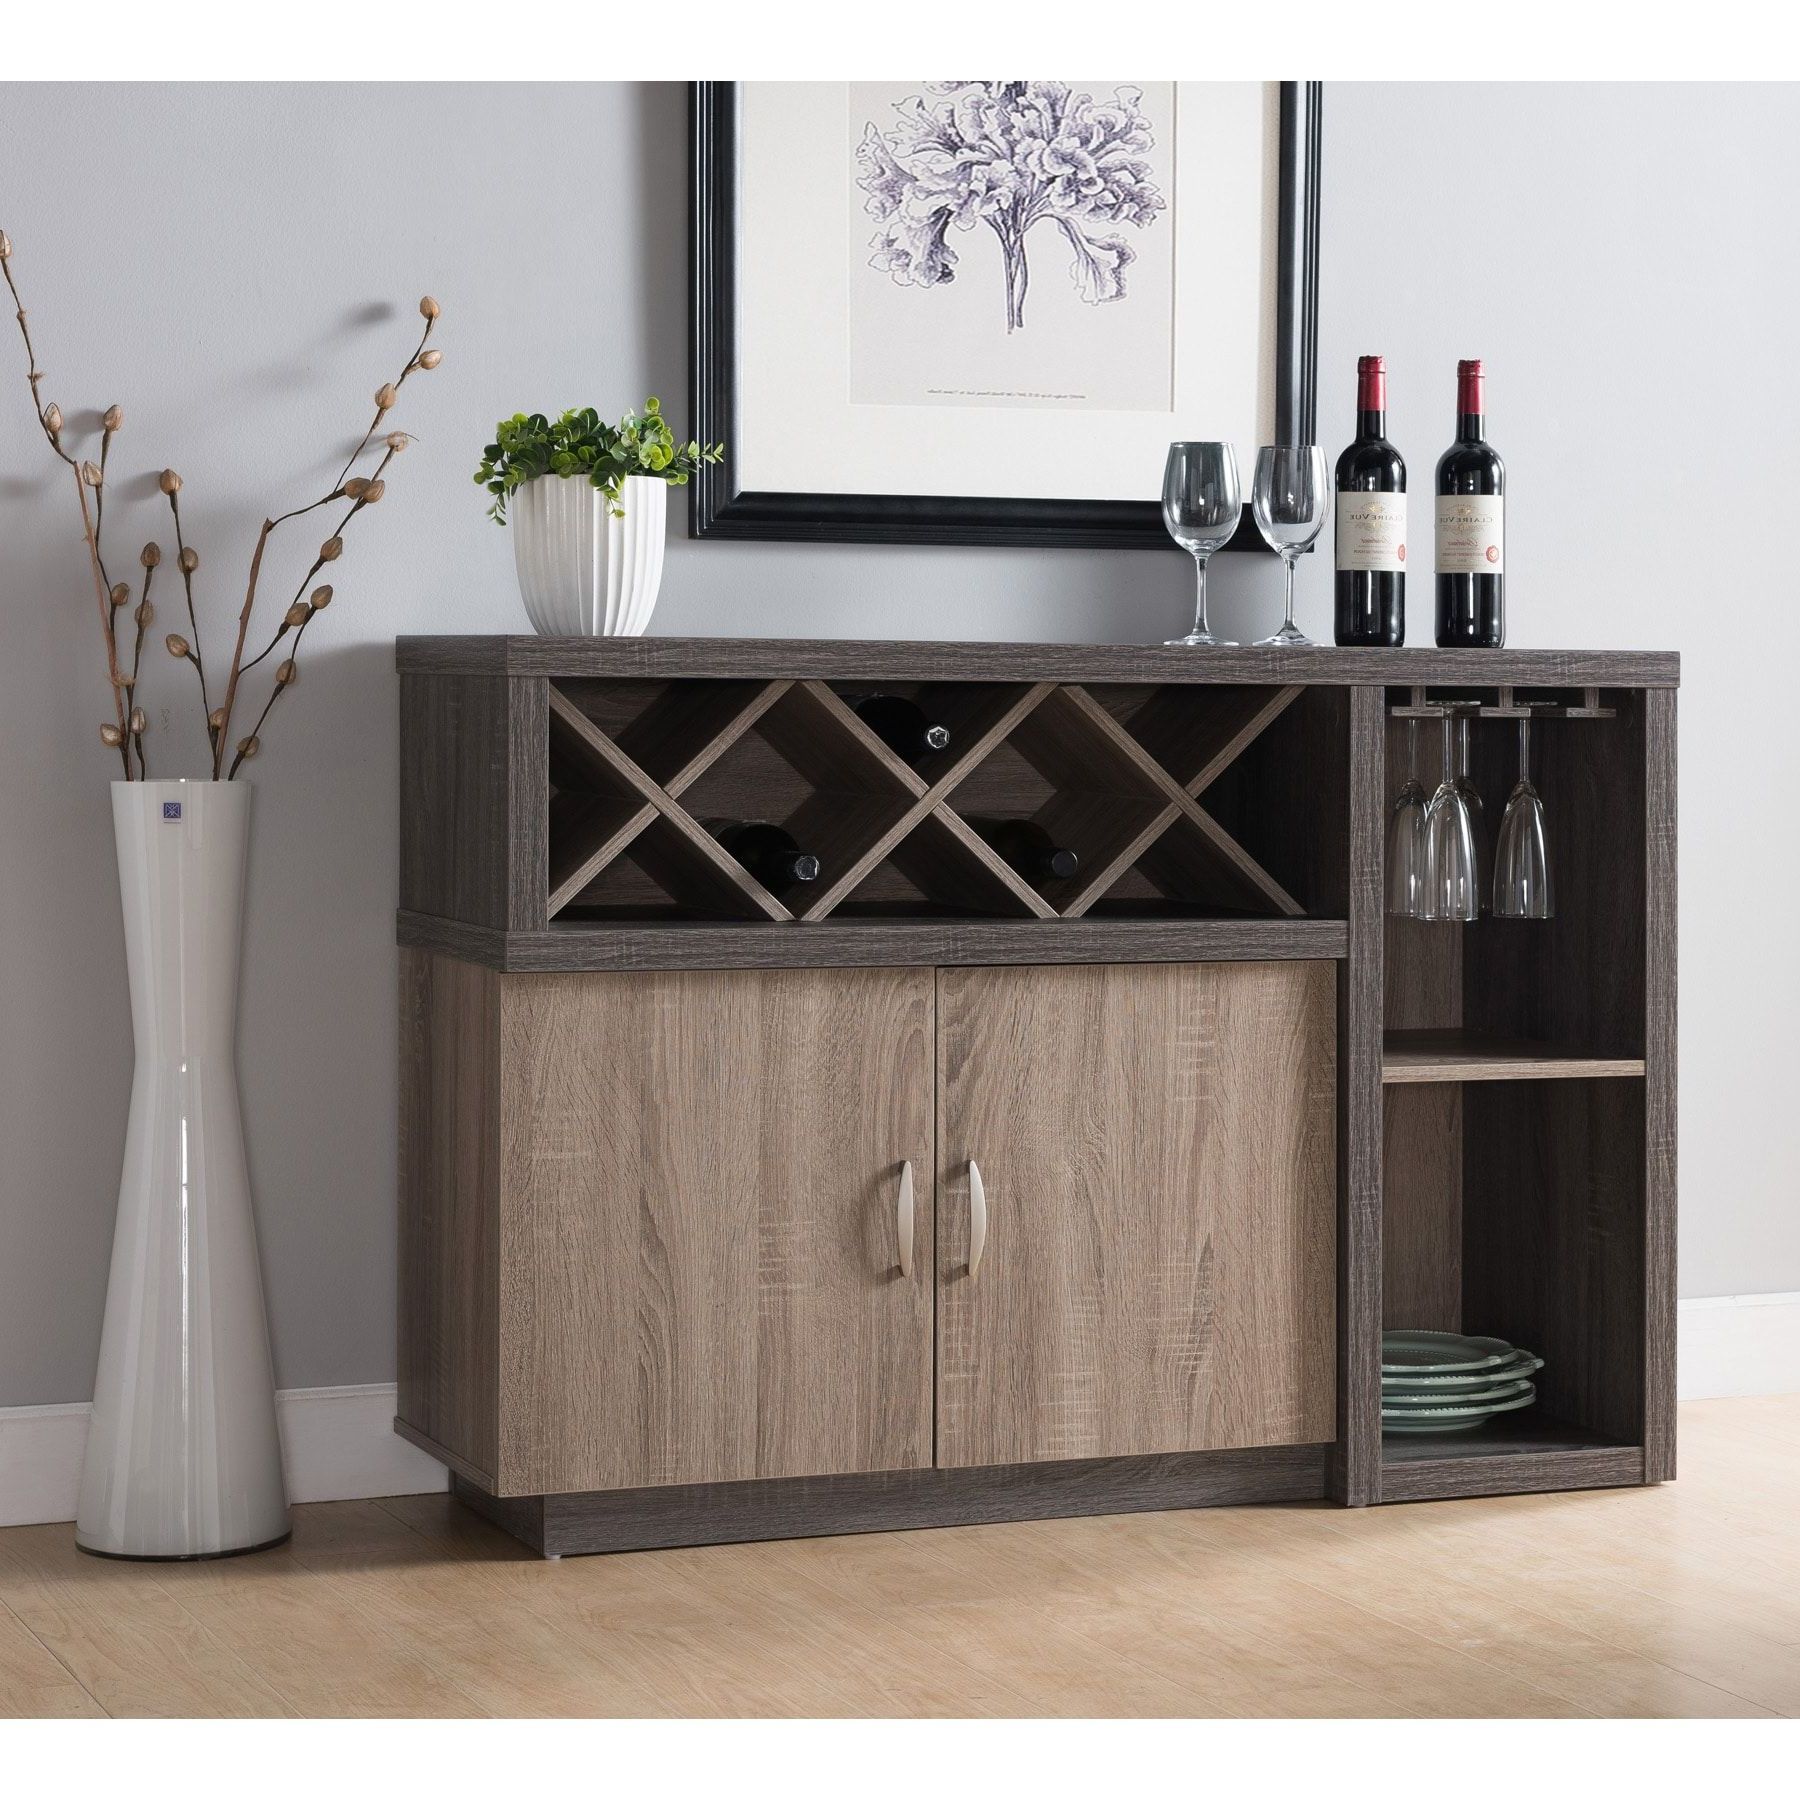 Furniture Of America Letty Contemporary Distressed Grey Within Contemporary Distressed Grey Buffets (Gallery 1 of 20)